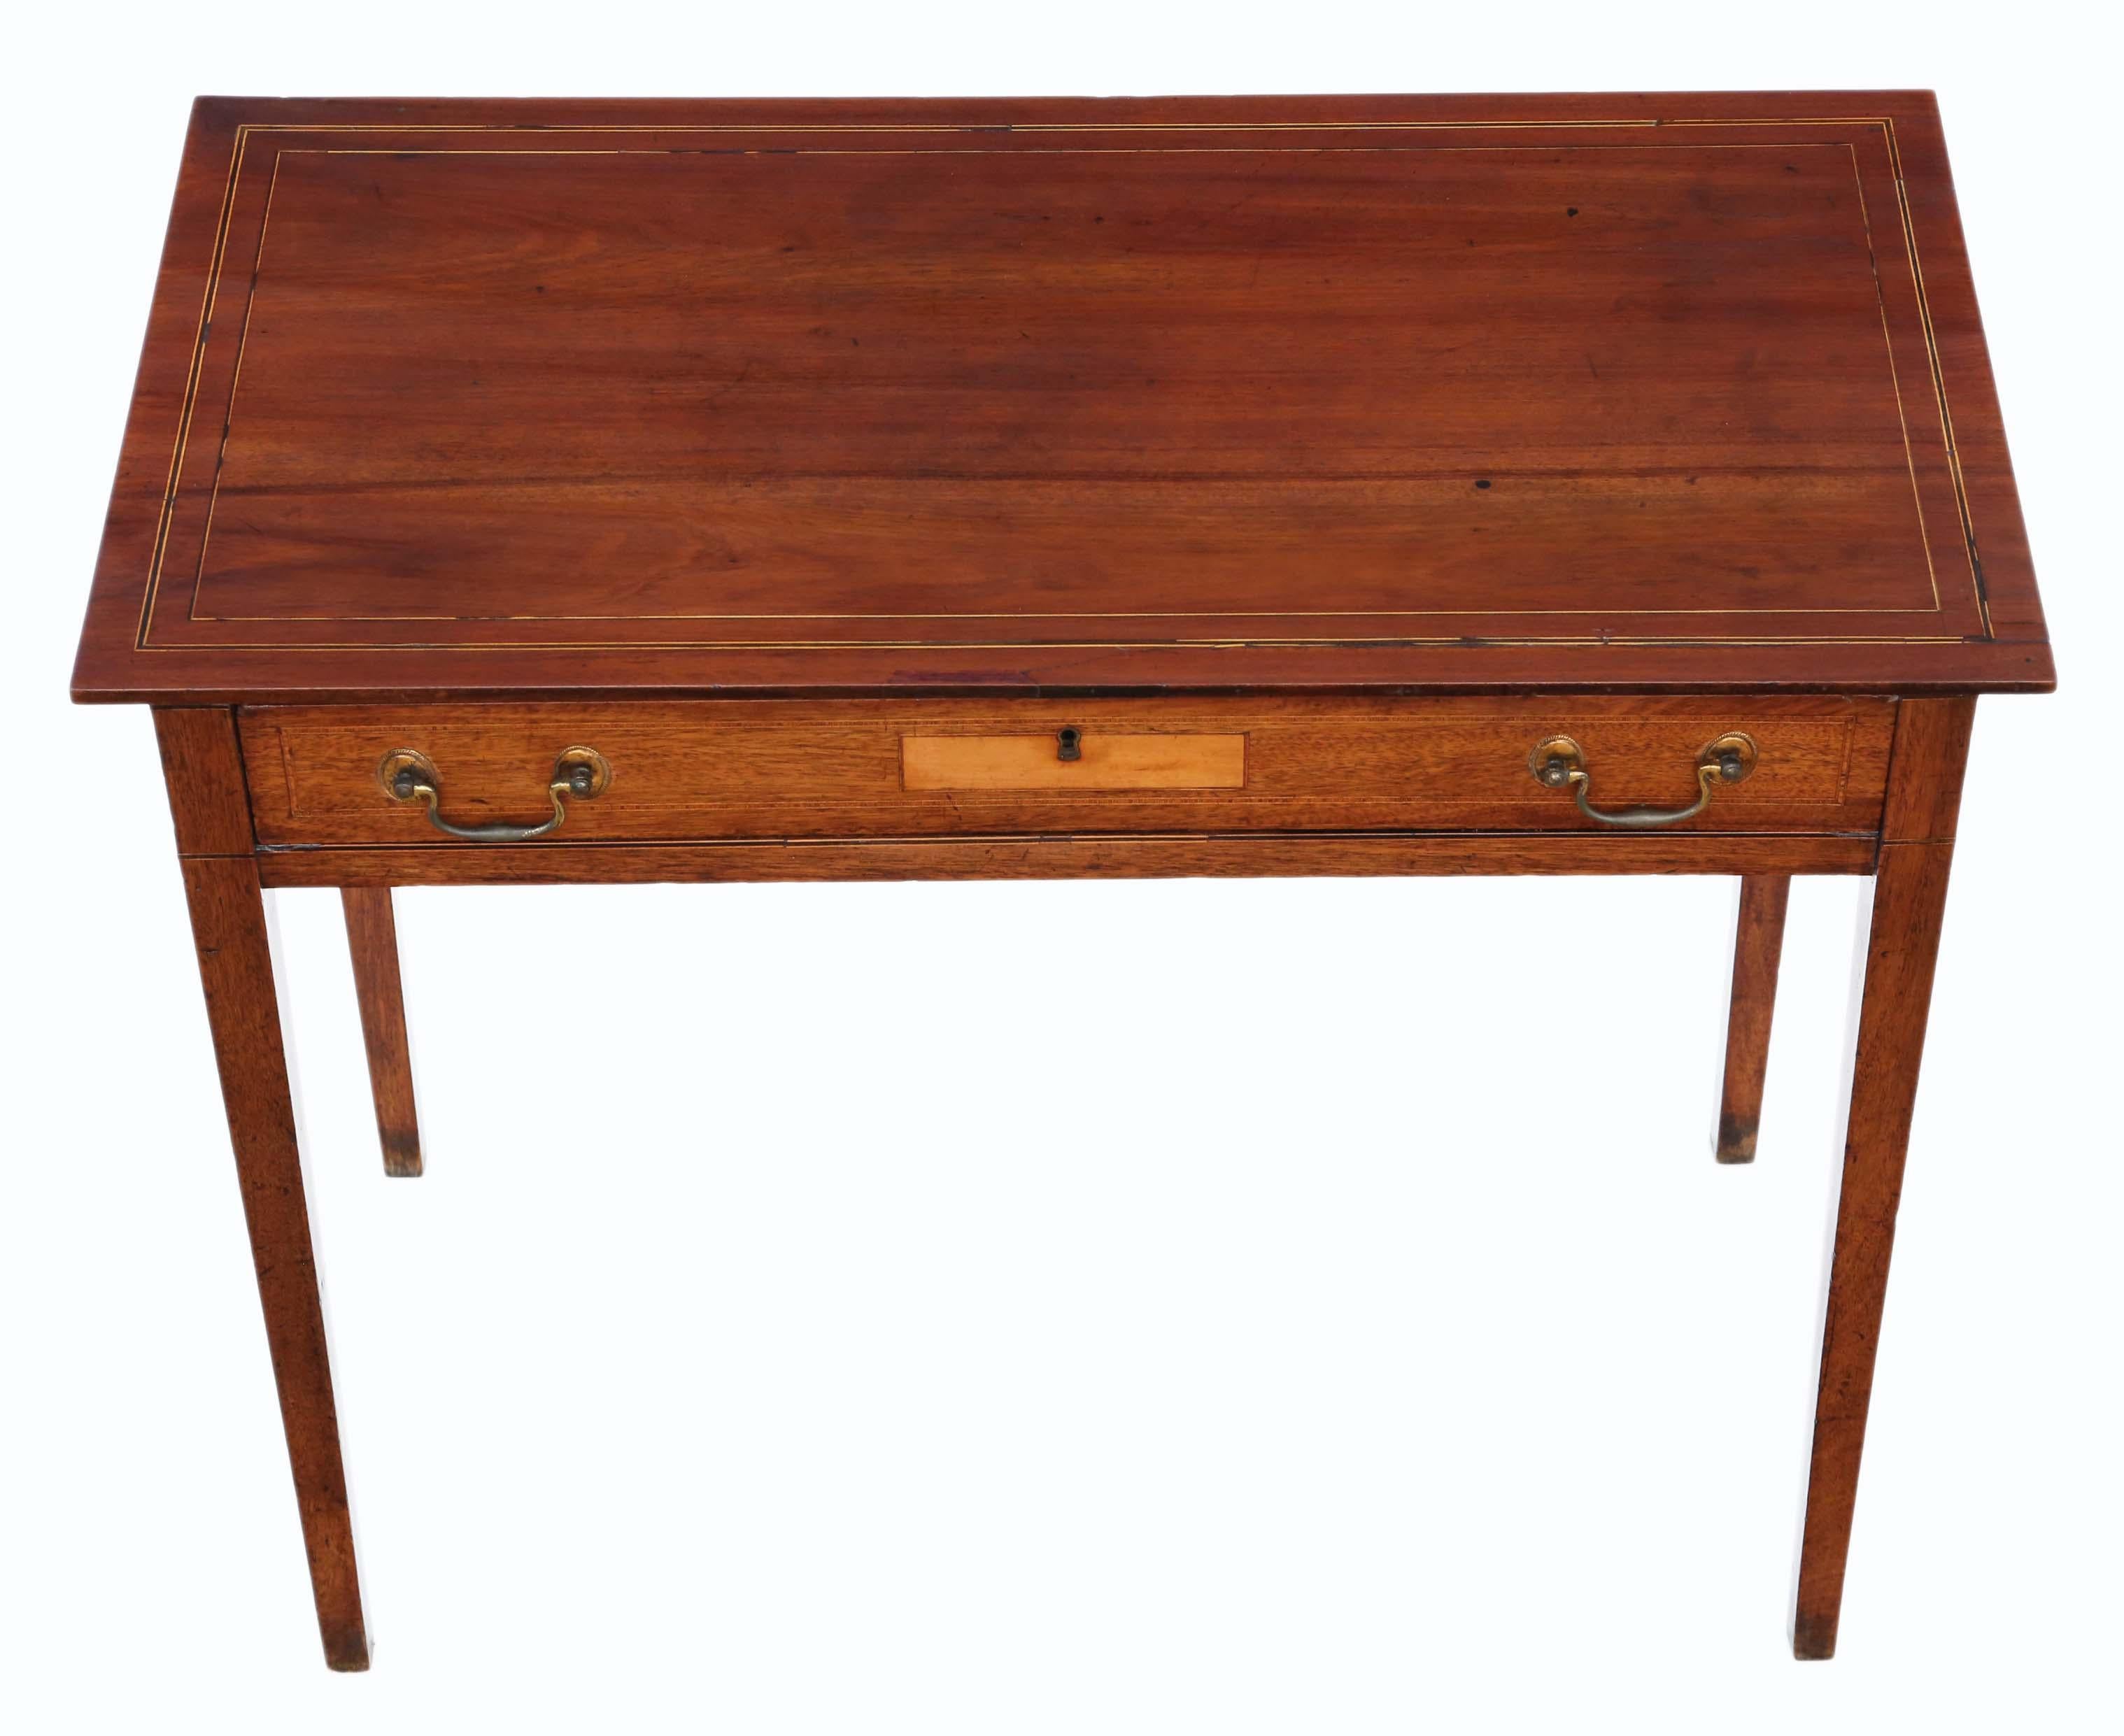 Antique Georgian circa 1800 inlaid mahogany writing side table desk.

No loose joints and no woodworm. Full of age, character and charm. The drawer slides freely.

Would look great in the right location! A charming, characterful